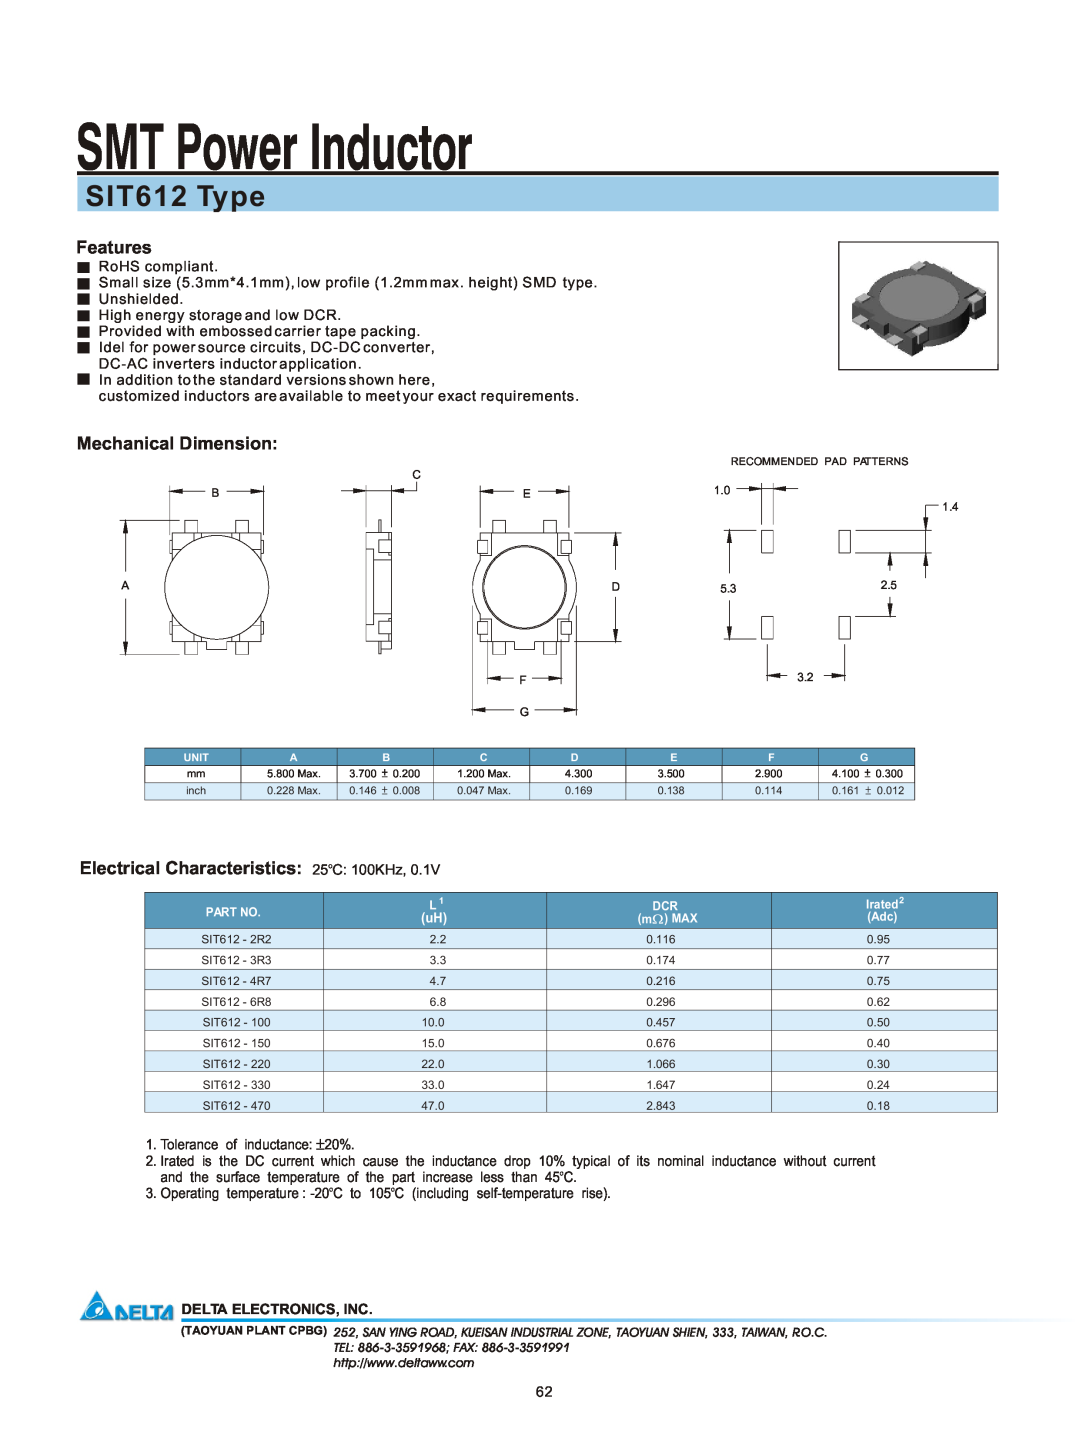 Delta Electronics manual SMT Power Inductor, SIT612 Type, Features, Mechanical Dimension, Electrical Characteristics 